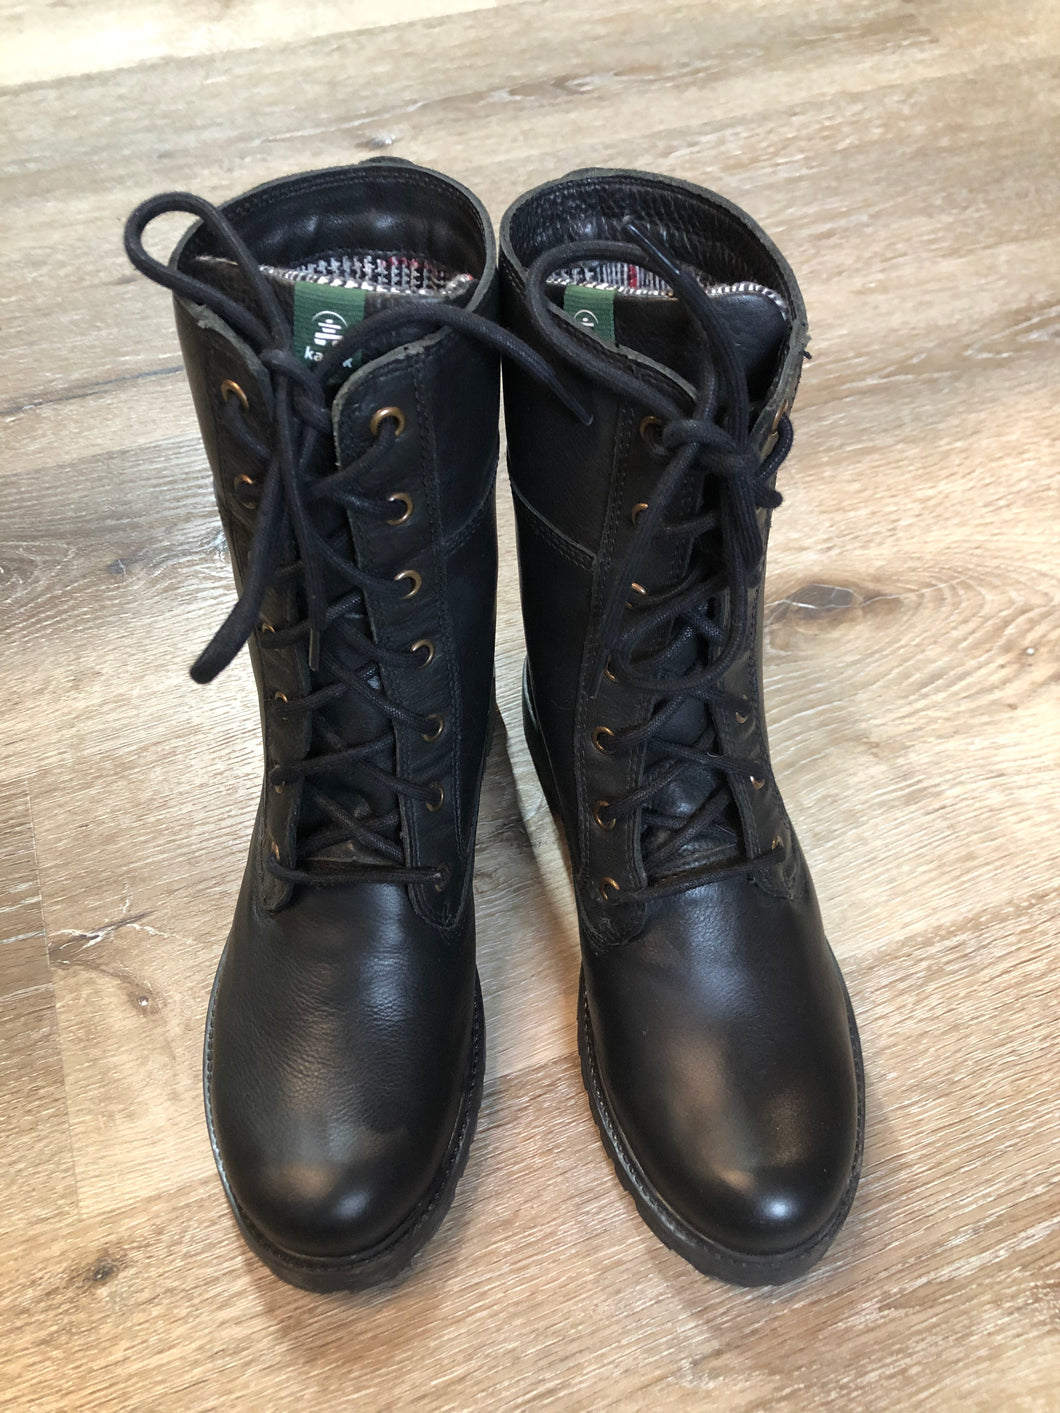 Kingspier Vintage - Kamik Autumn 7 eyelet lace up winter boot in black with seam-sealed waterproof genuine leather upper and decorative plaid inside collar, fleece lining and rubber sole.

Size 7 womens

The uppers and soles are in excellent condition. NWOT.